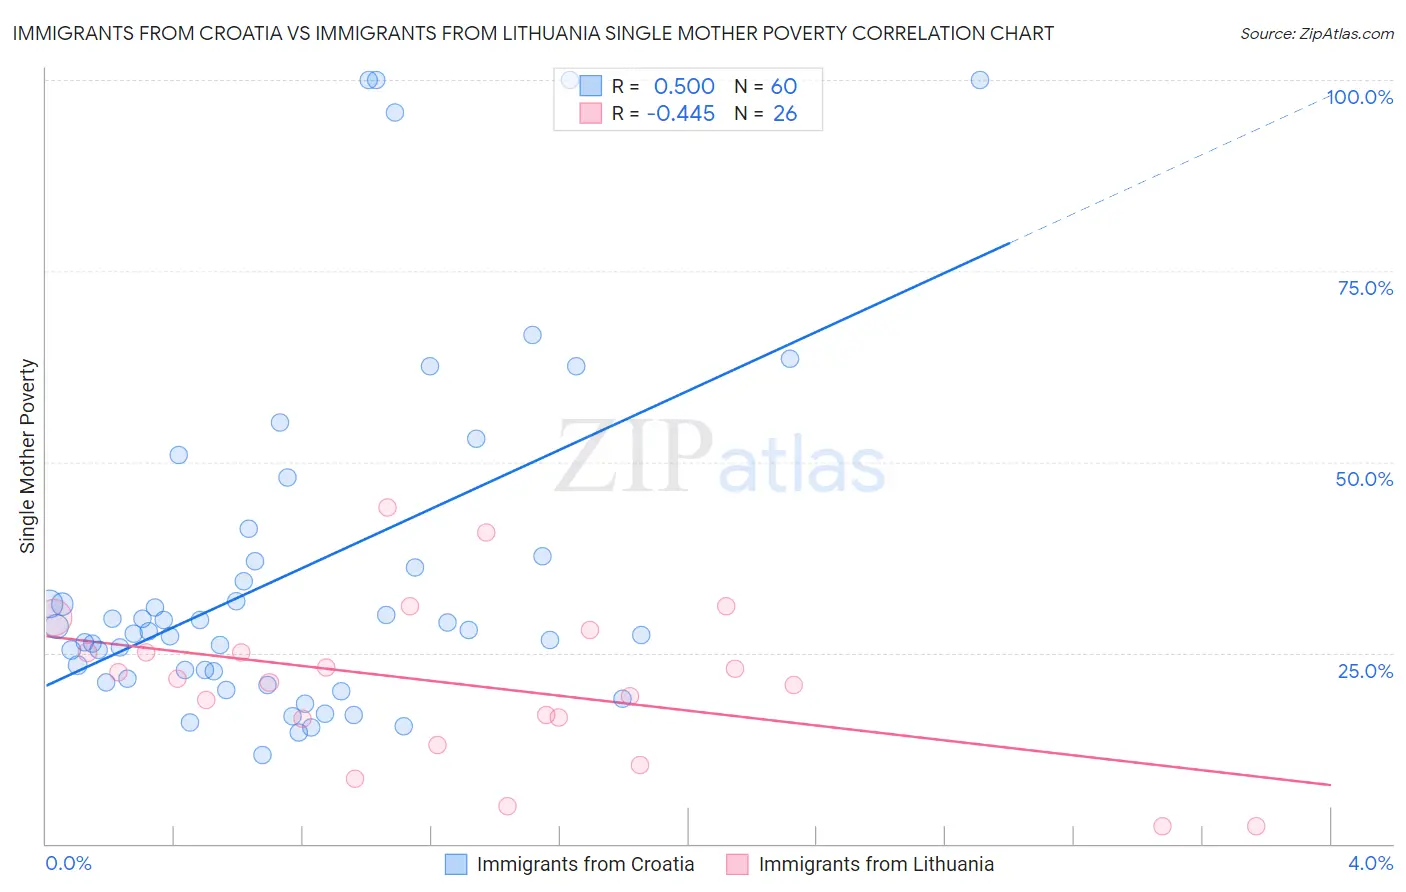 Immigrants from Croatia vs Immigrants from Lithuania Single Mother Poverty